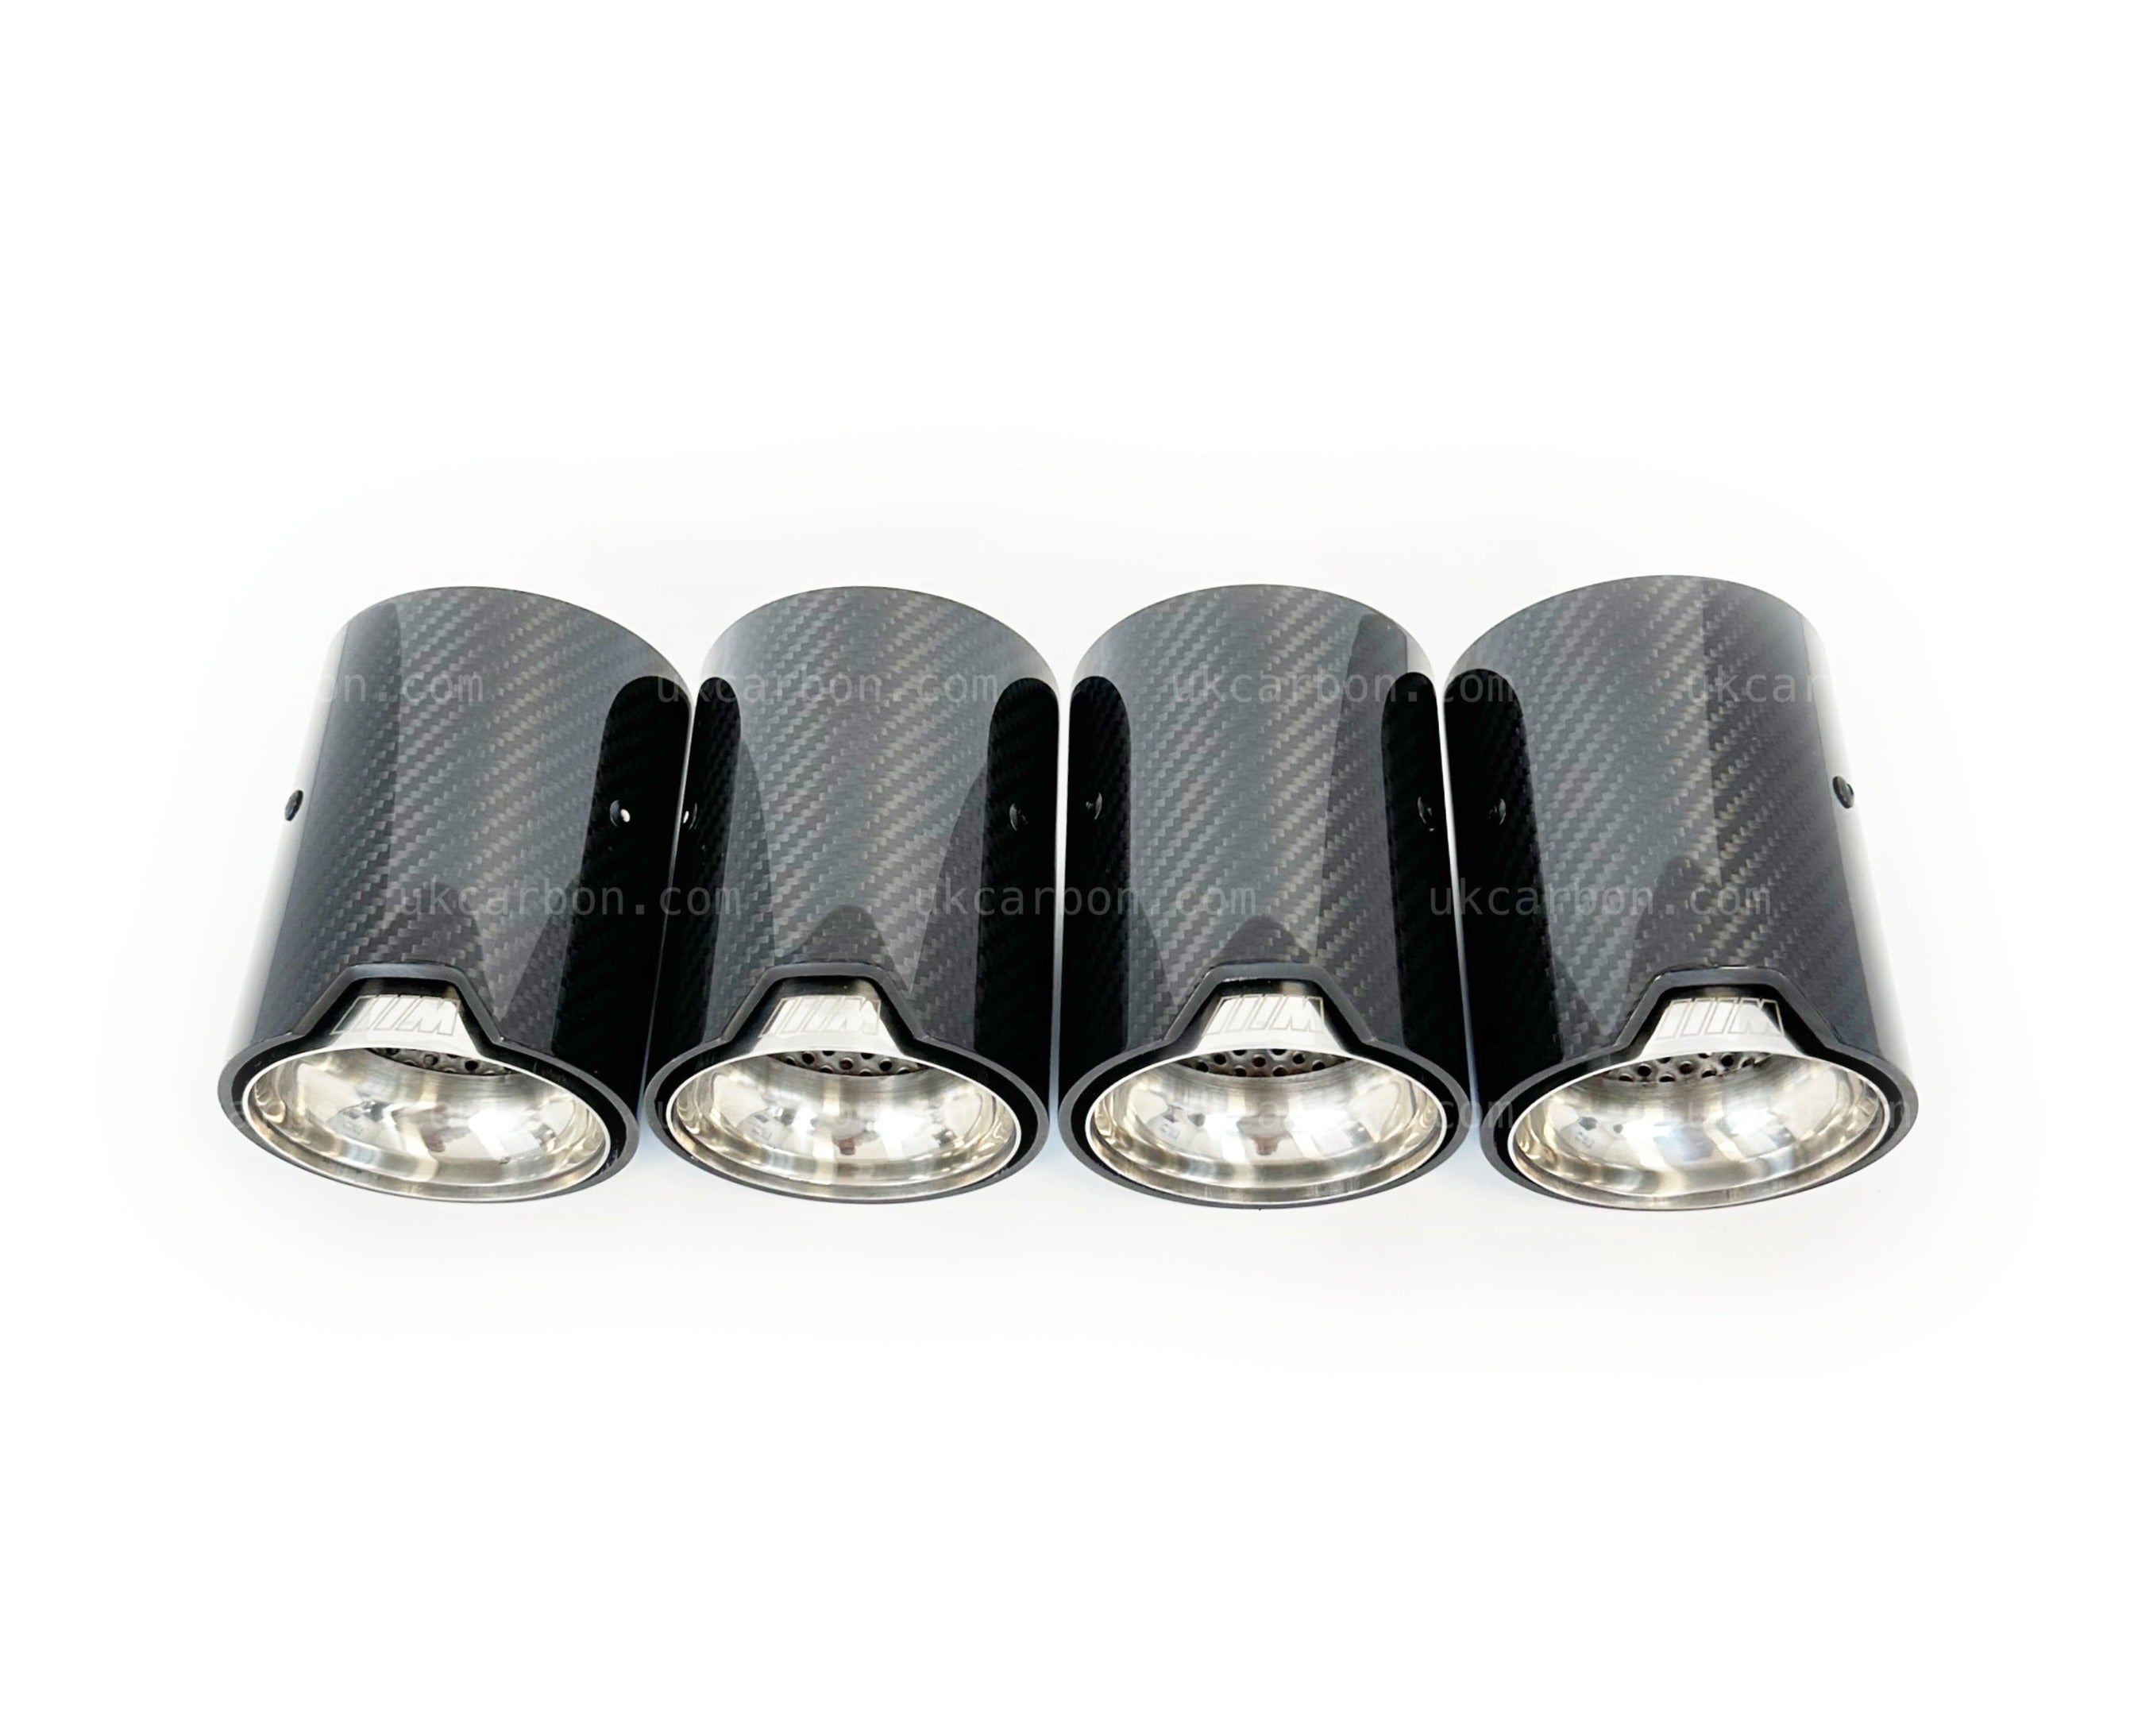 BMW M2 M3 M4 Carbon Exhaust Tips Silver Fibre MP MPE F87 F80 F82 F83 by UKCarbon